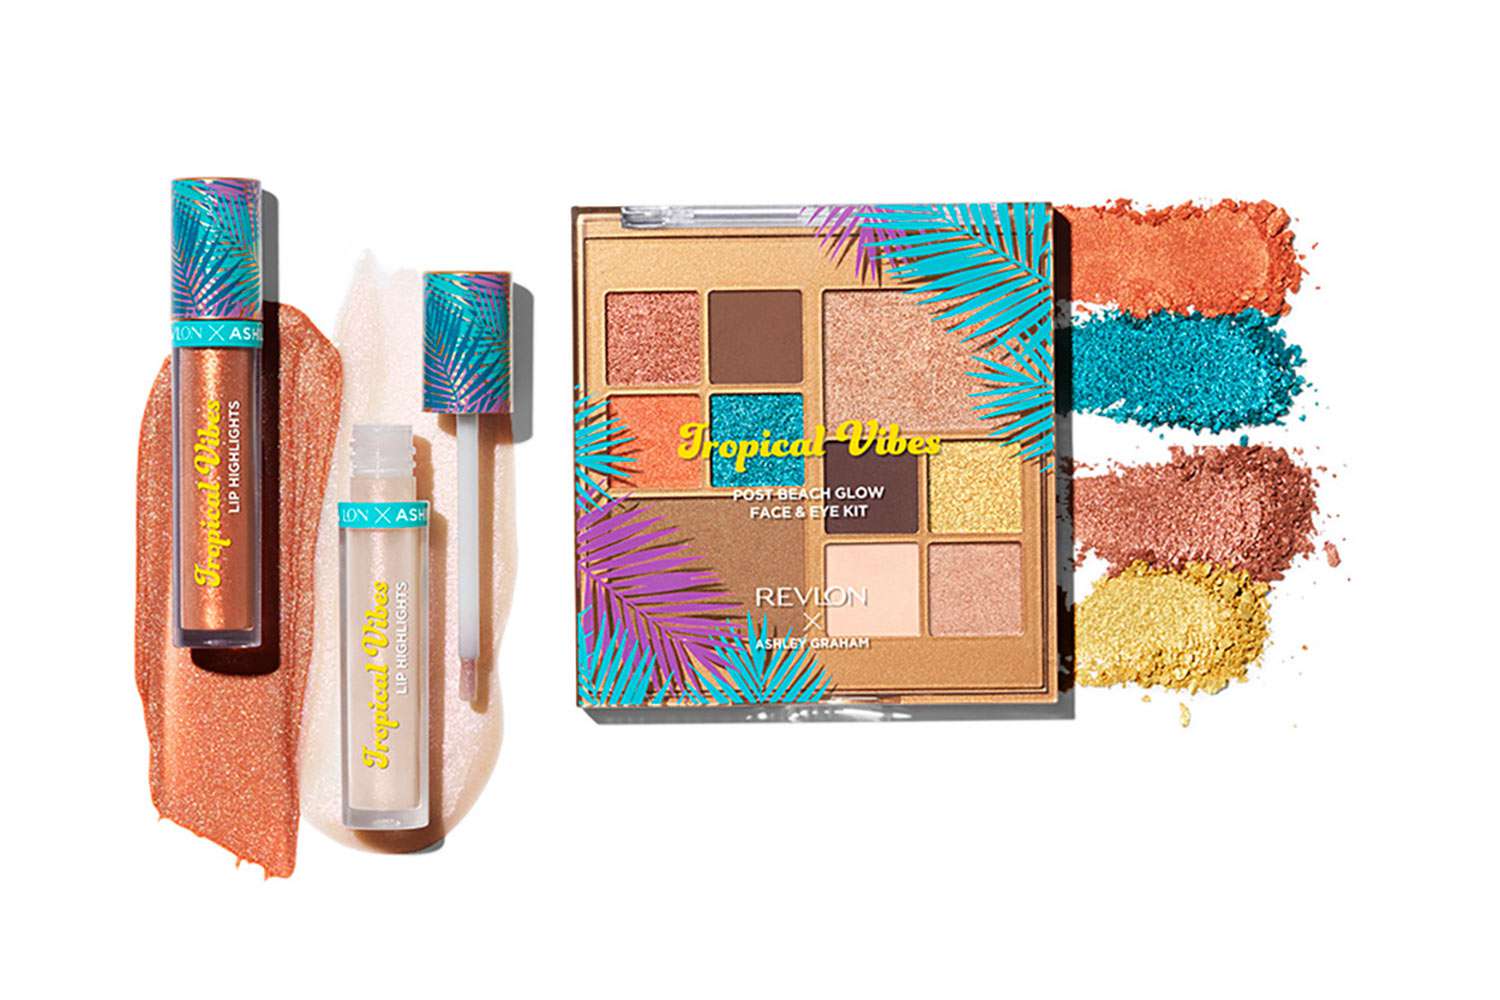 Ashley Graham Tropical Vibes Collection from Revlon